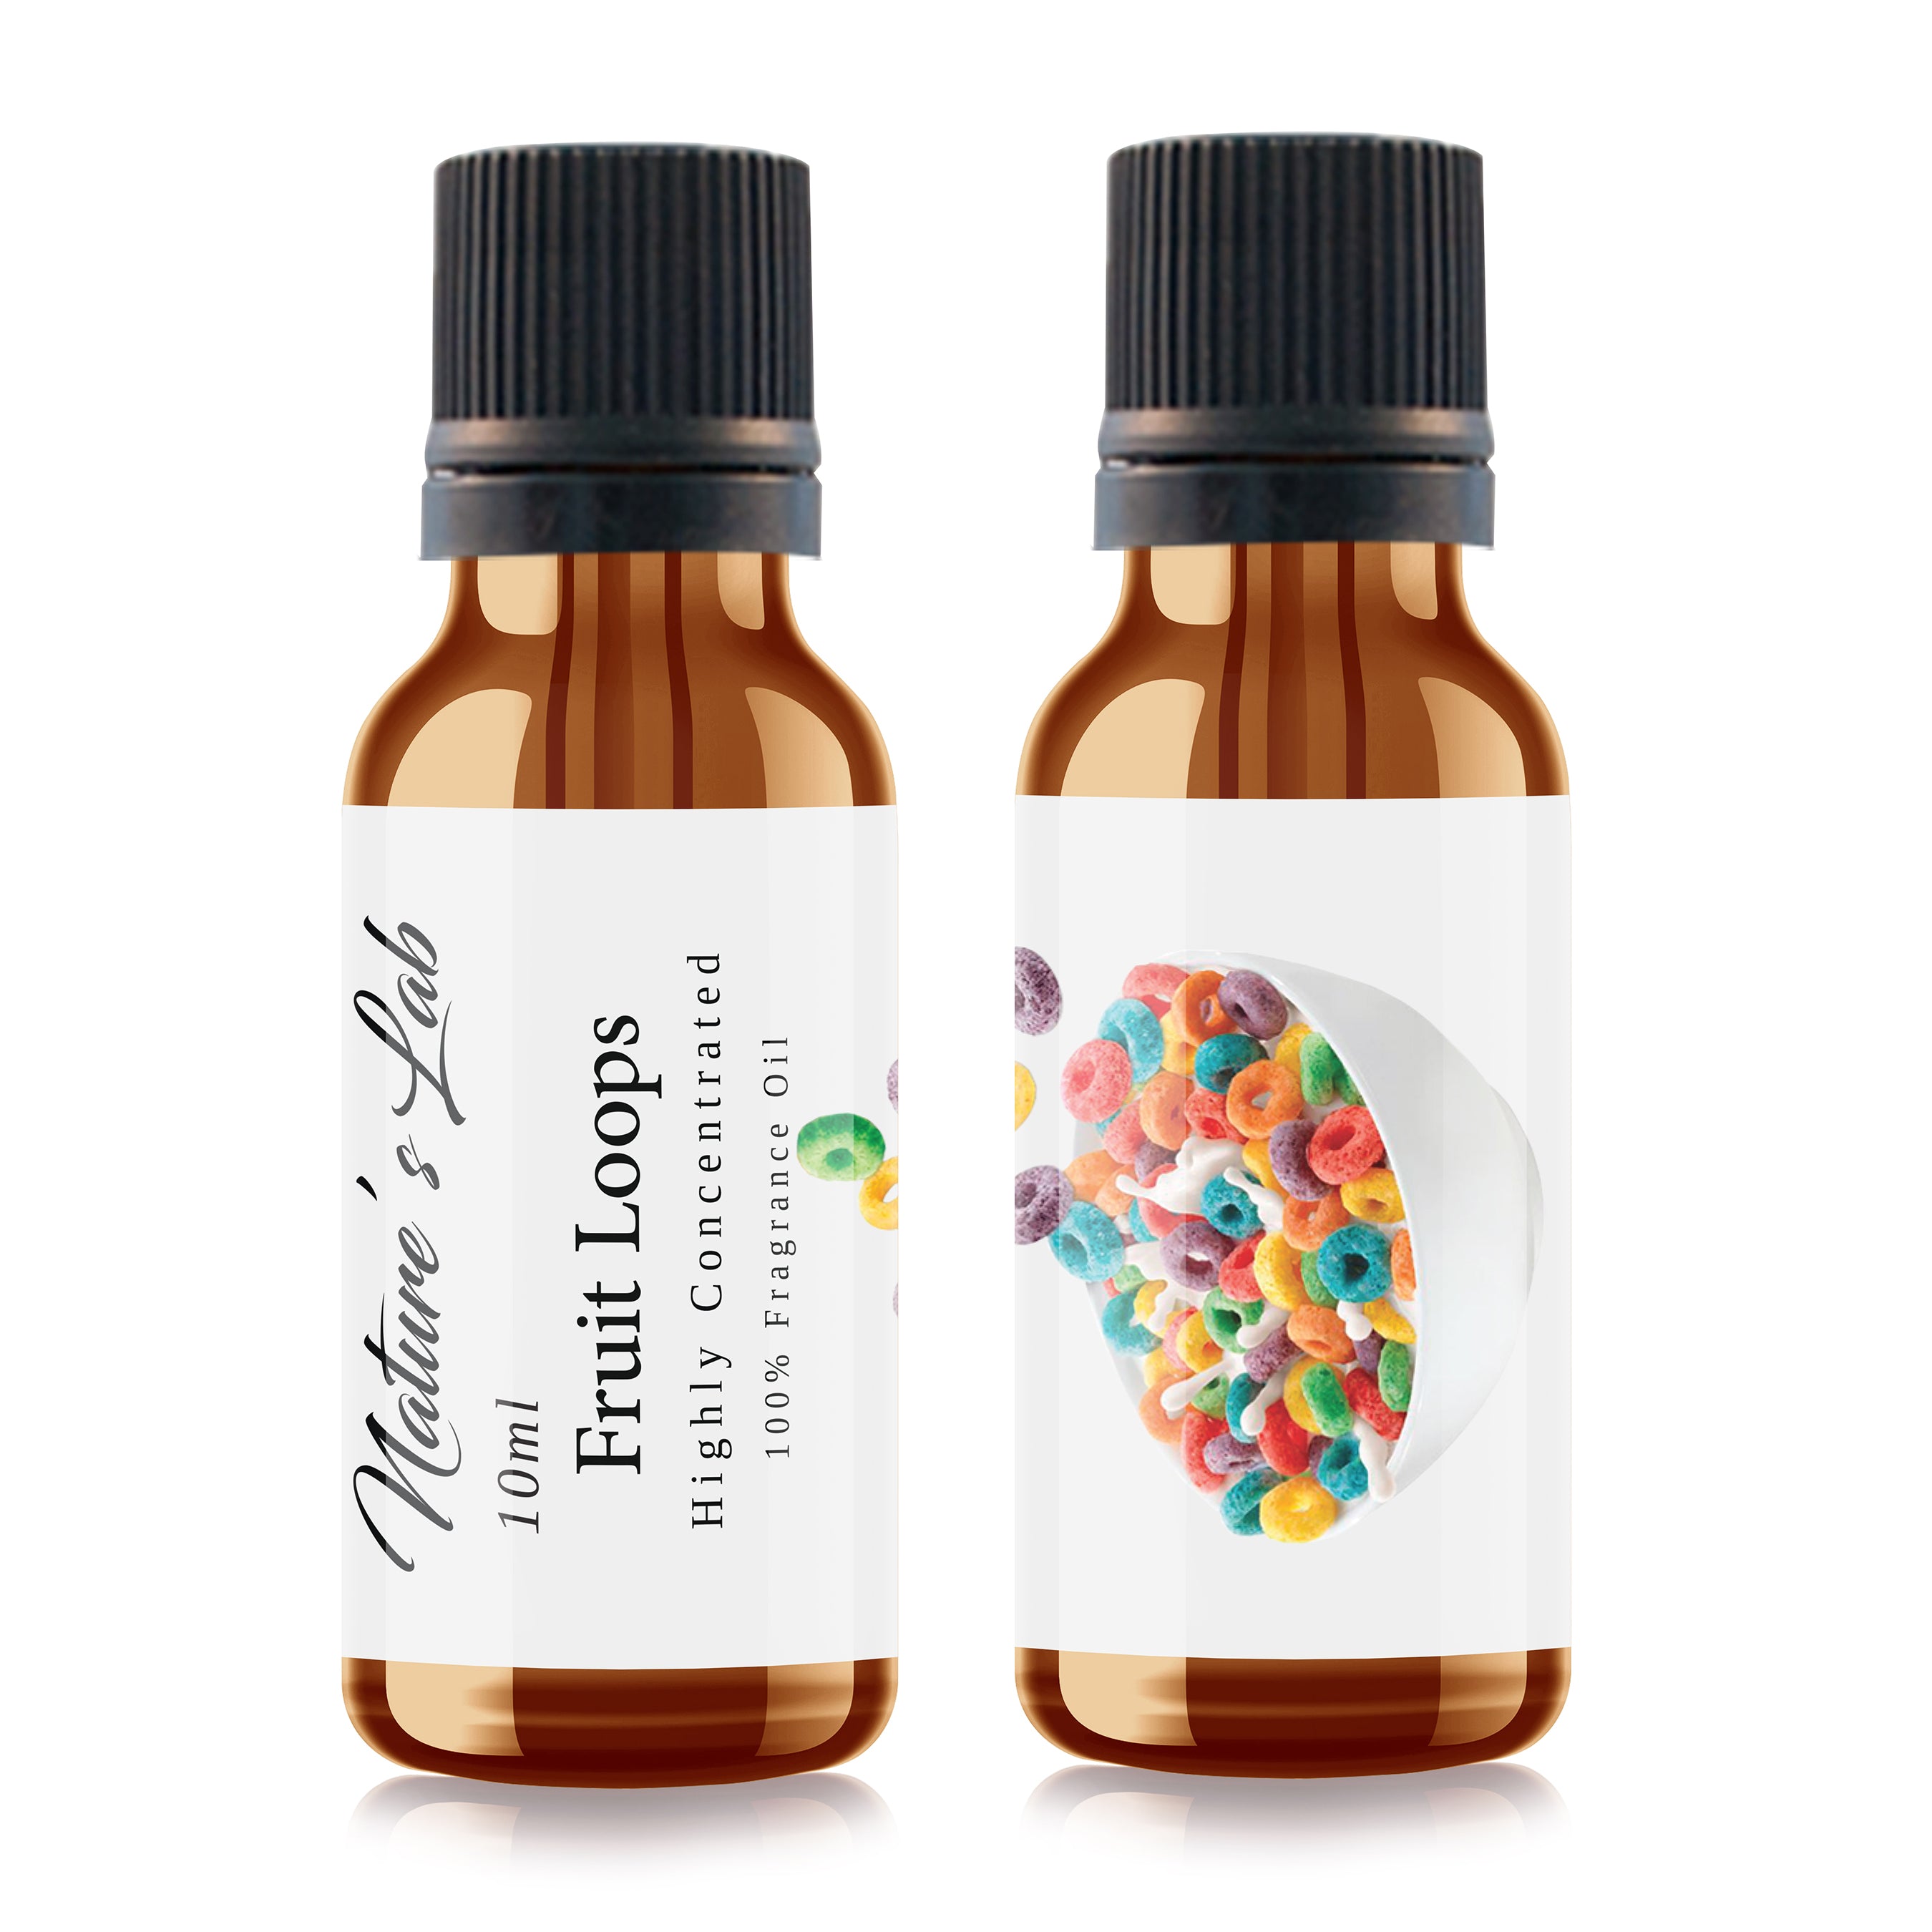 Nature's Oil Our Version of Fruit Loops Fragrance Oil